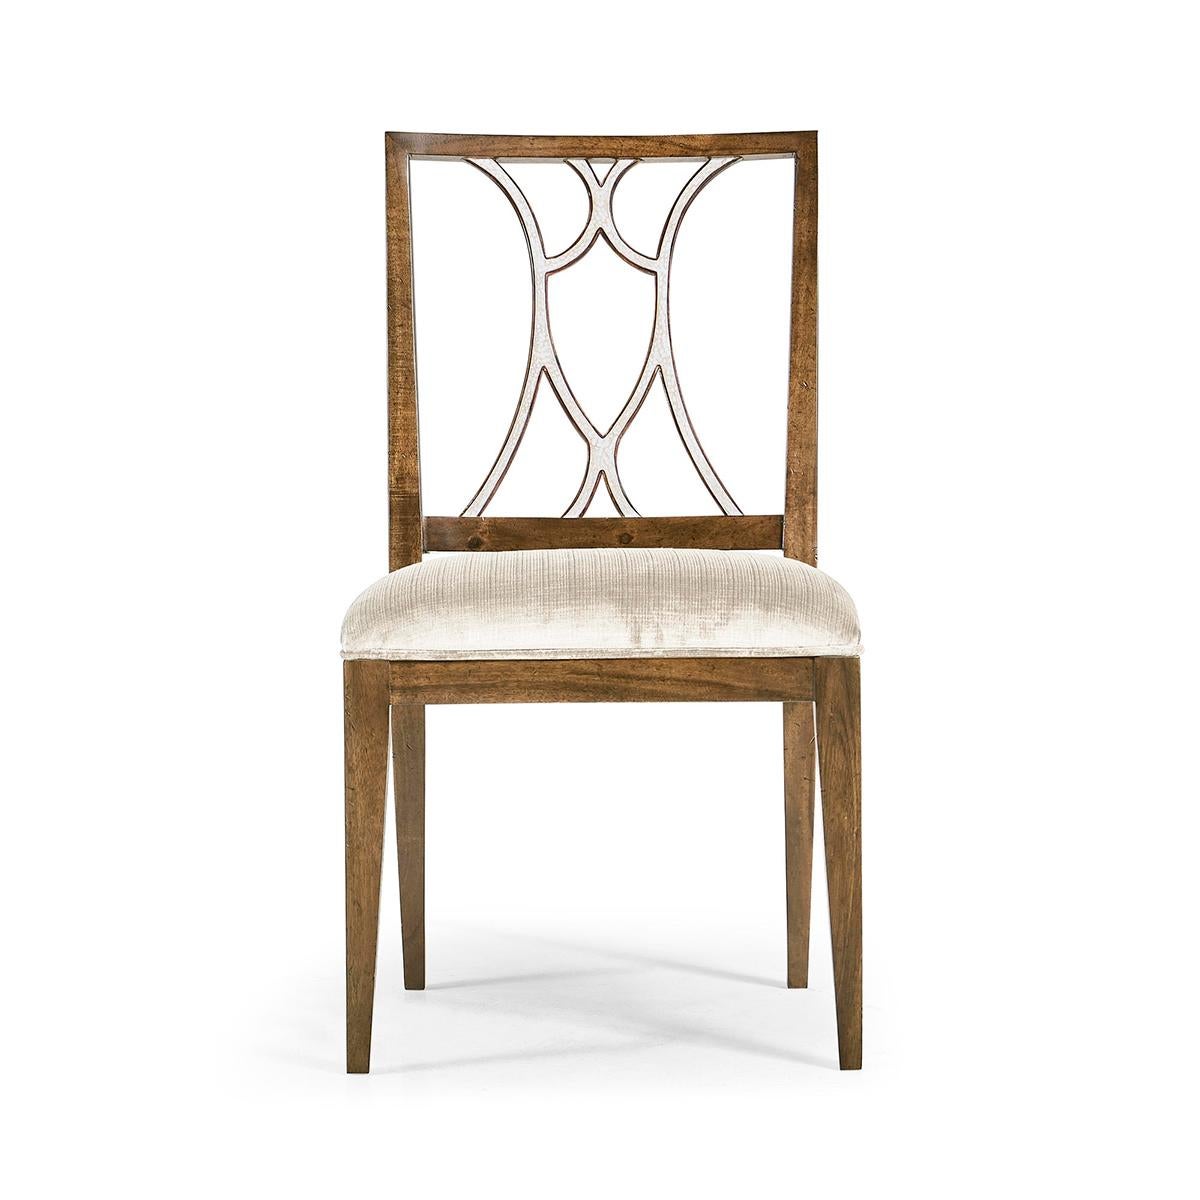 Crafted from rich mahogany, this chair features a classic silhouette that gracefully blends with any decor style. The chair's standout feature is its exquisite white eggshell inlay on both the inside and outside back, showcasing exceptional